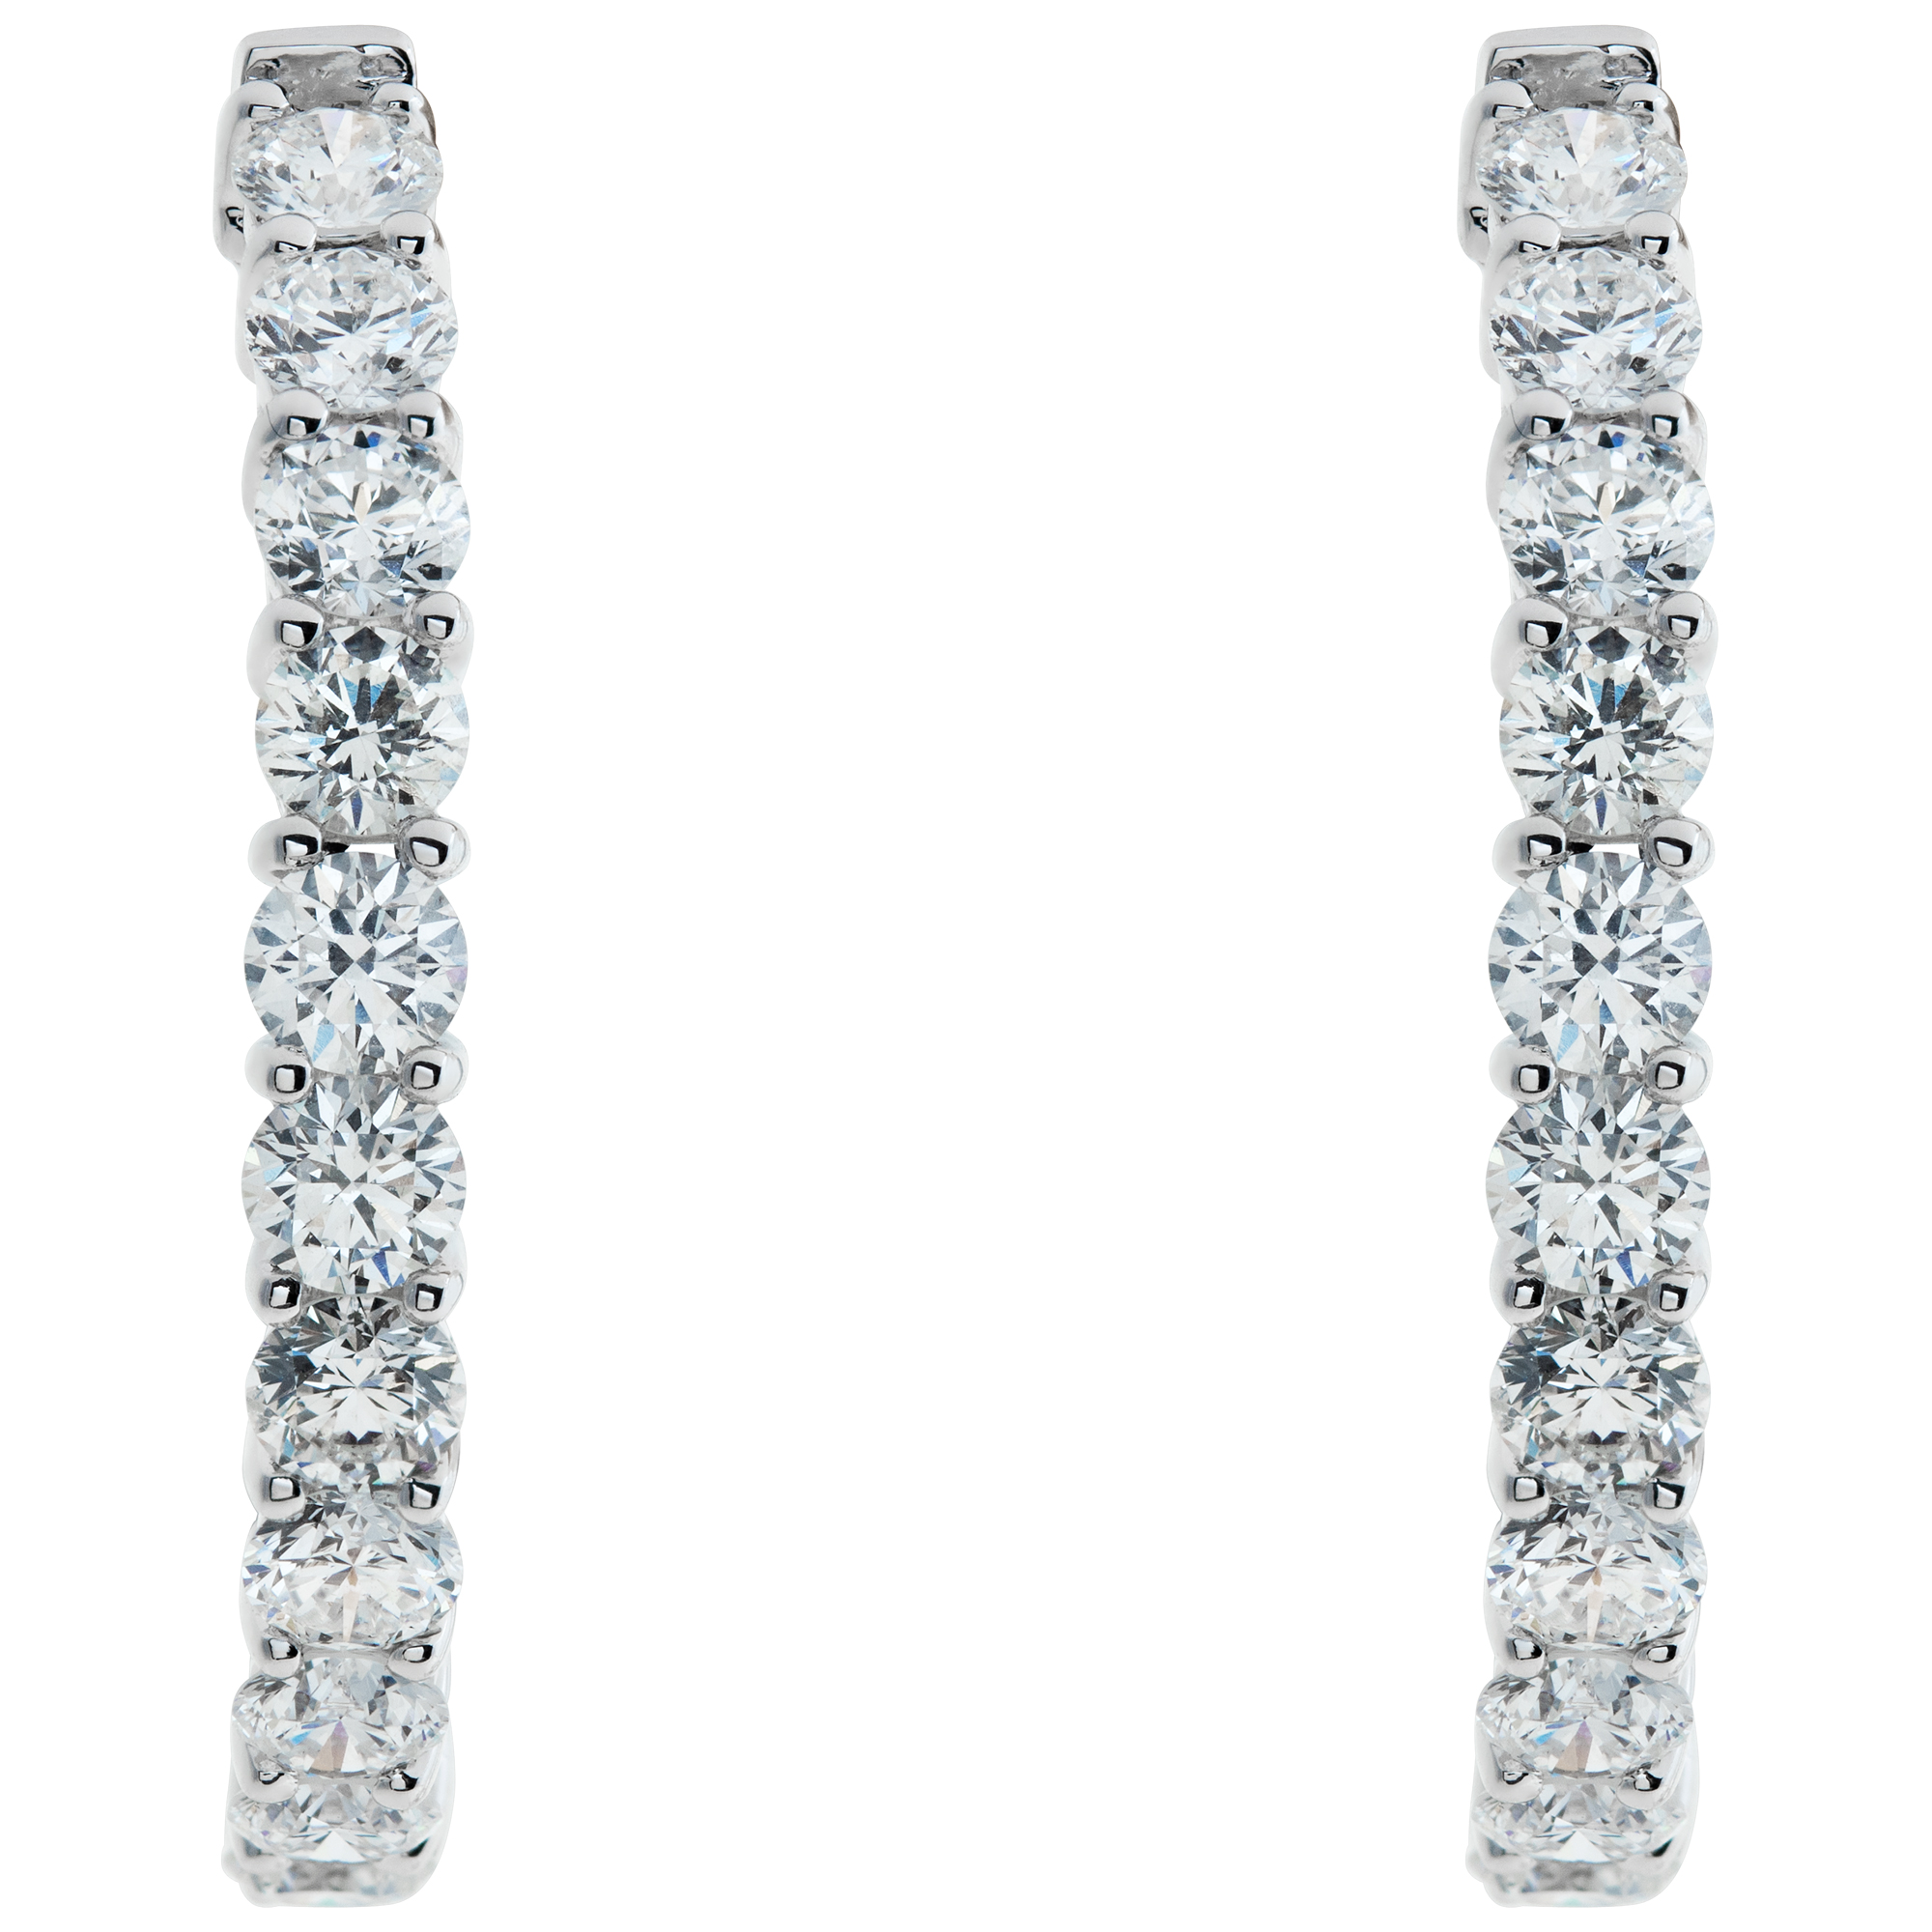 Stunning 18k white gold inside-out diamond hoop earrings with 5.5 carats in round diamonds